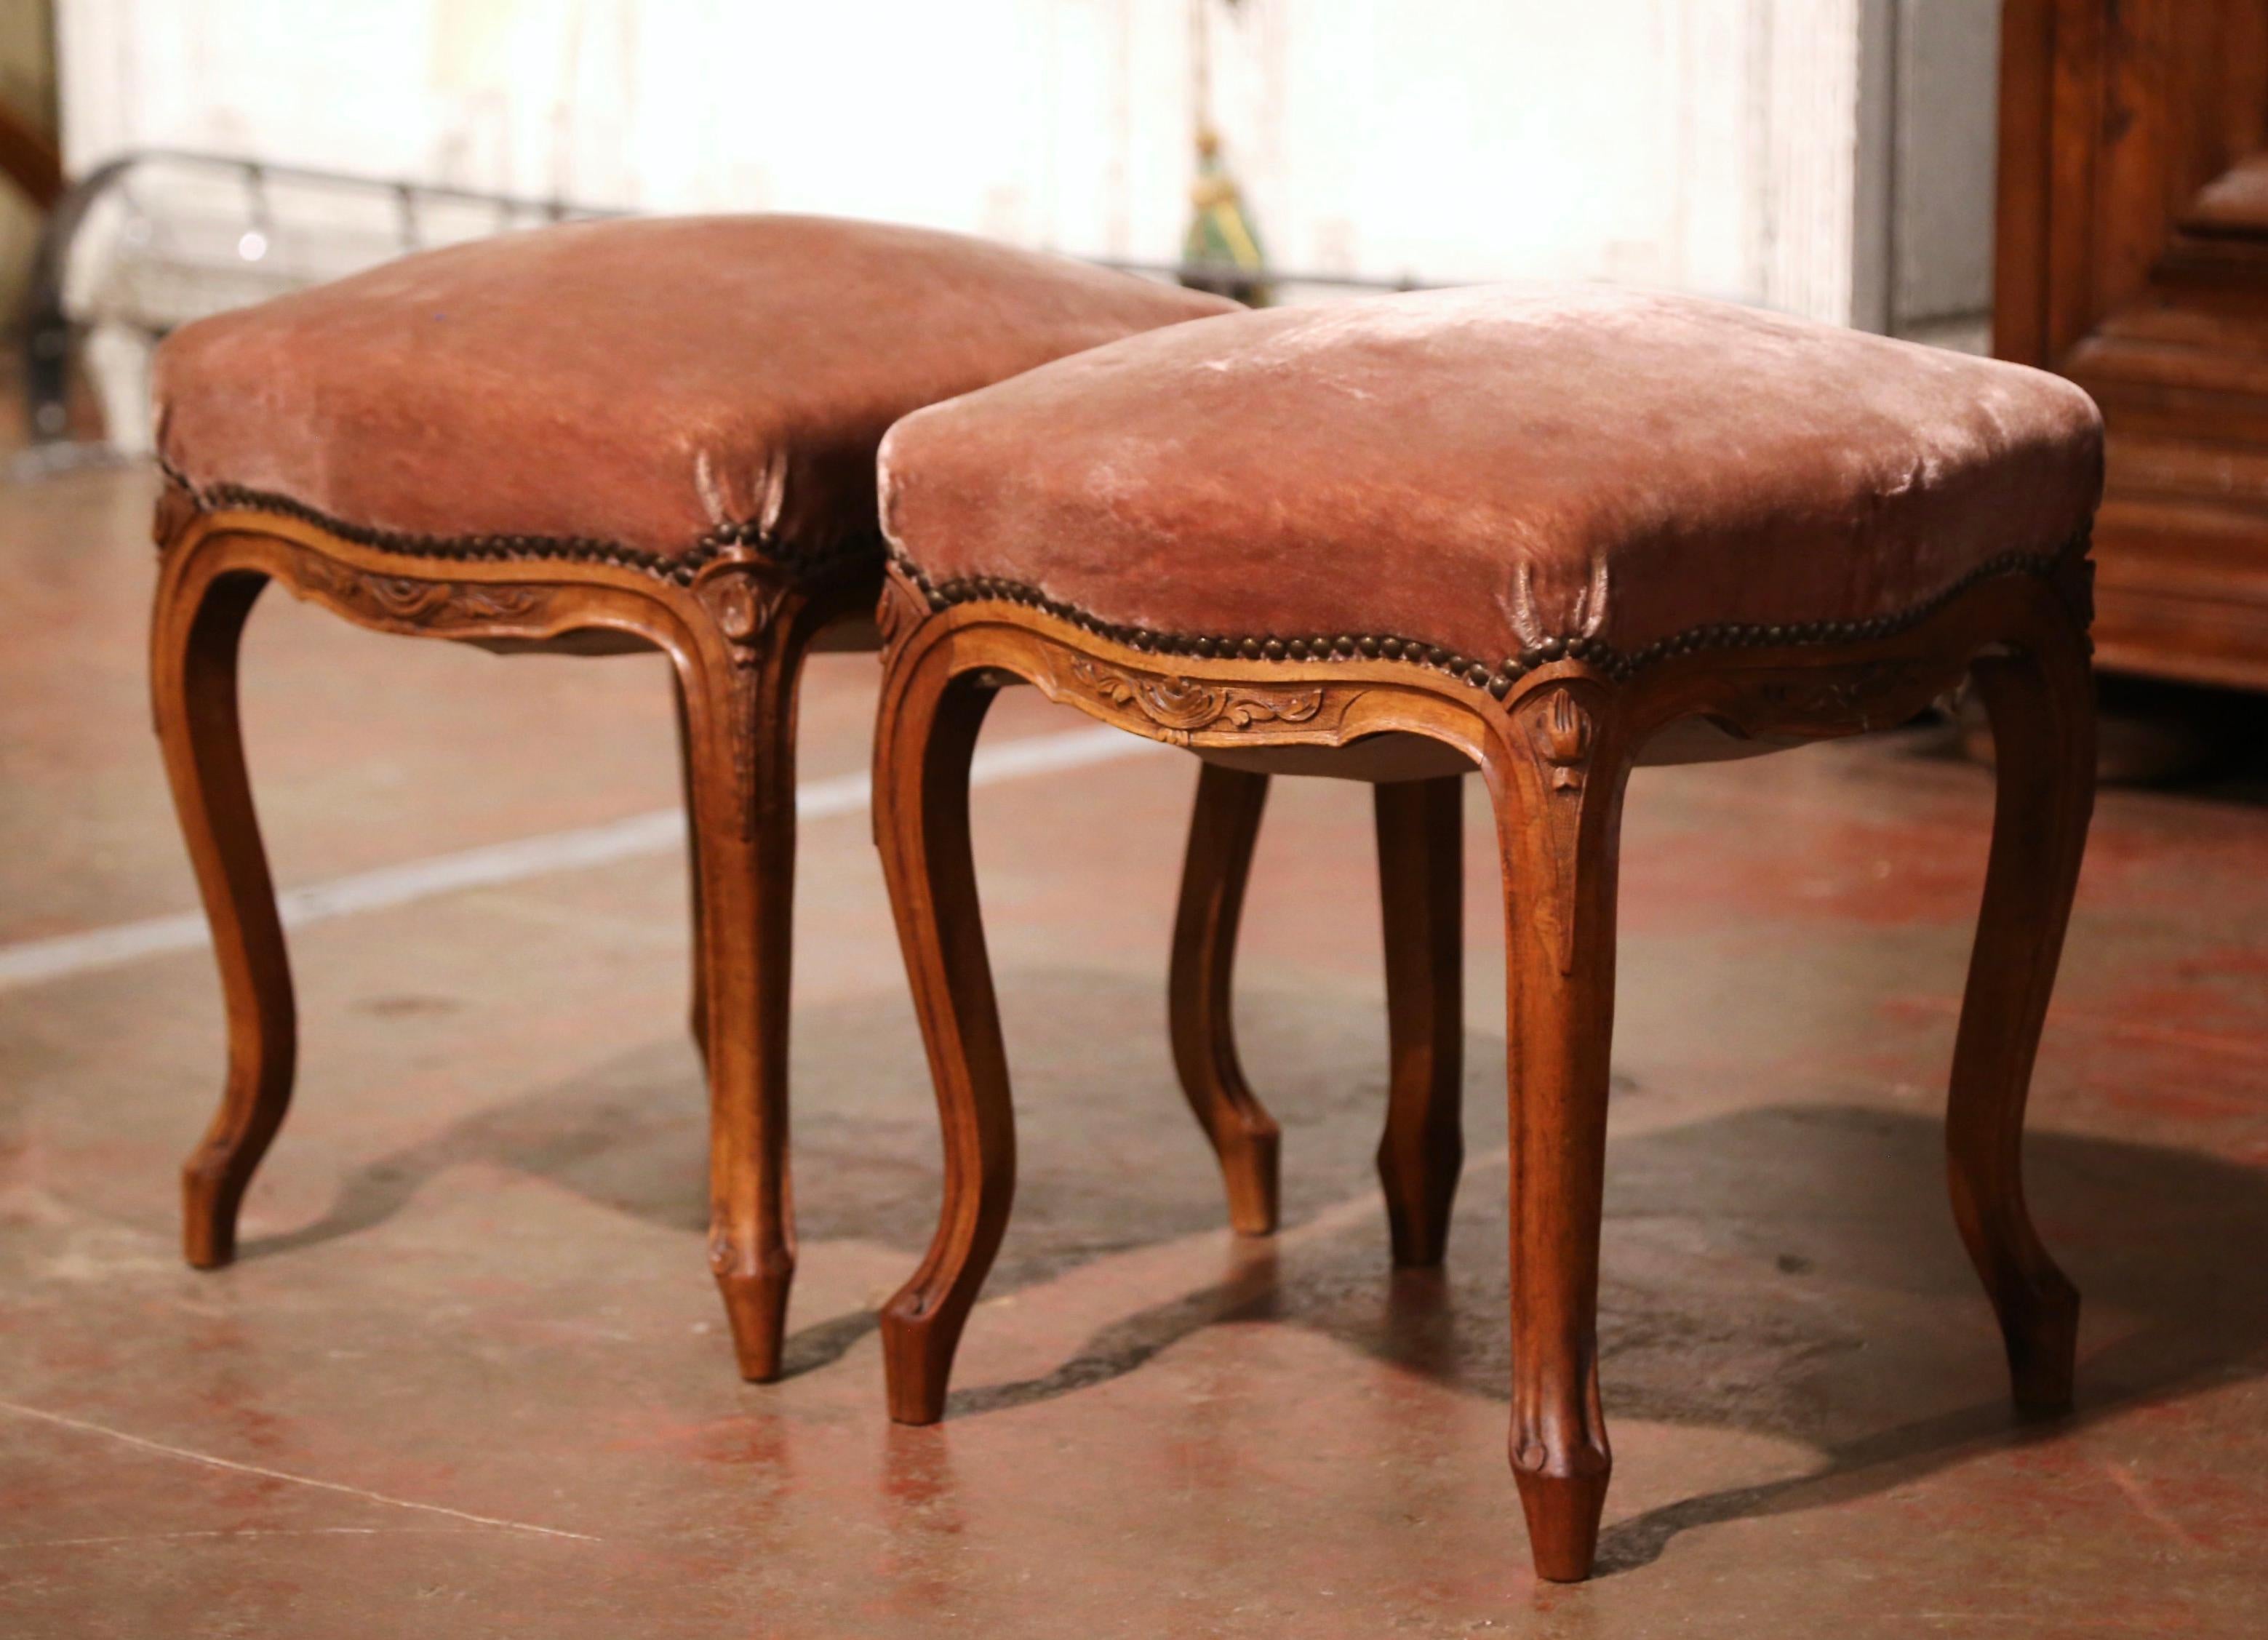 These elegant antique stools were crafted in Provence, France circa 1920. Standing on cabriole legs ending with scrolled feet and decorated with carved leaf decor at the shoulder, each stool features a bombe scalloped apron with foliage motifs. Each